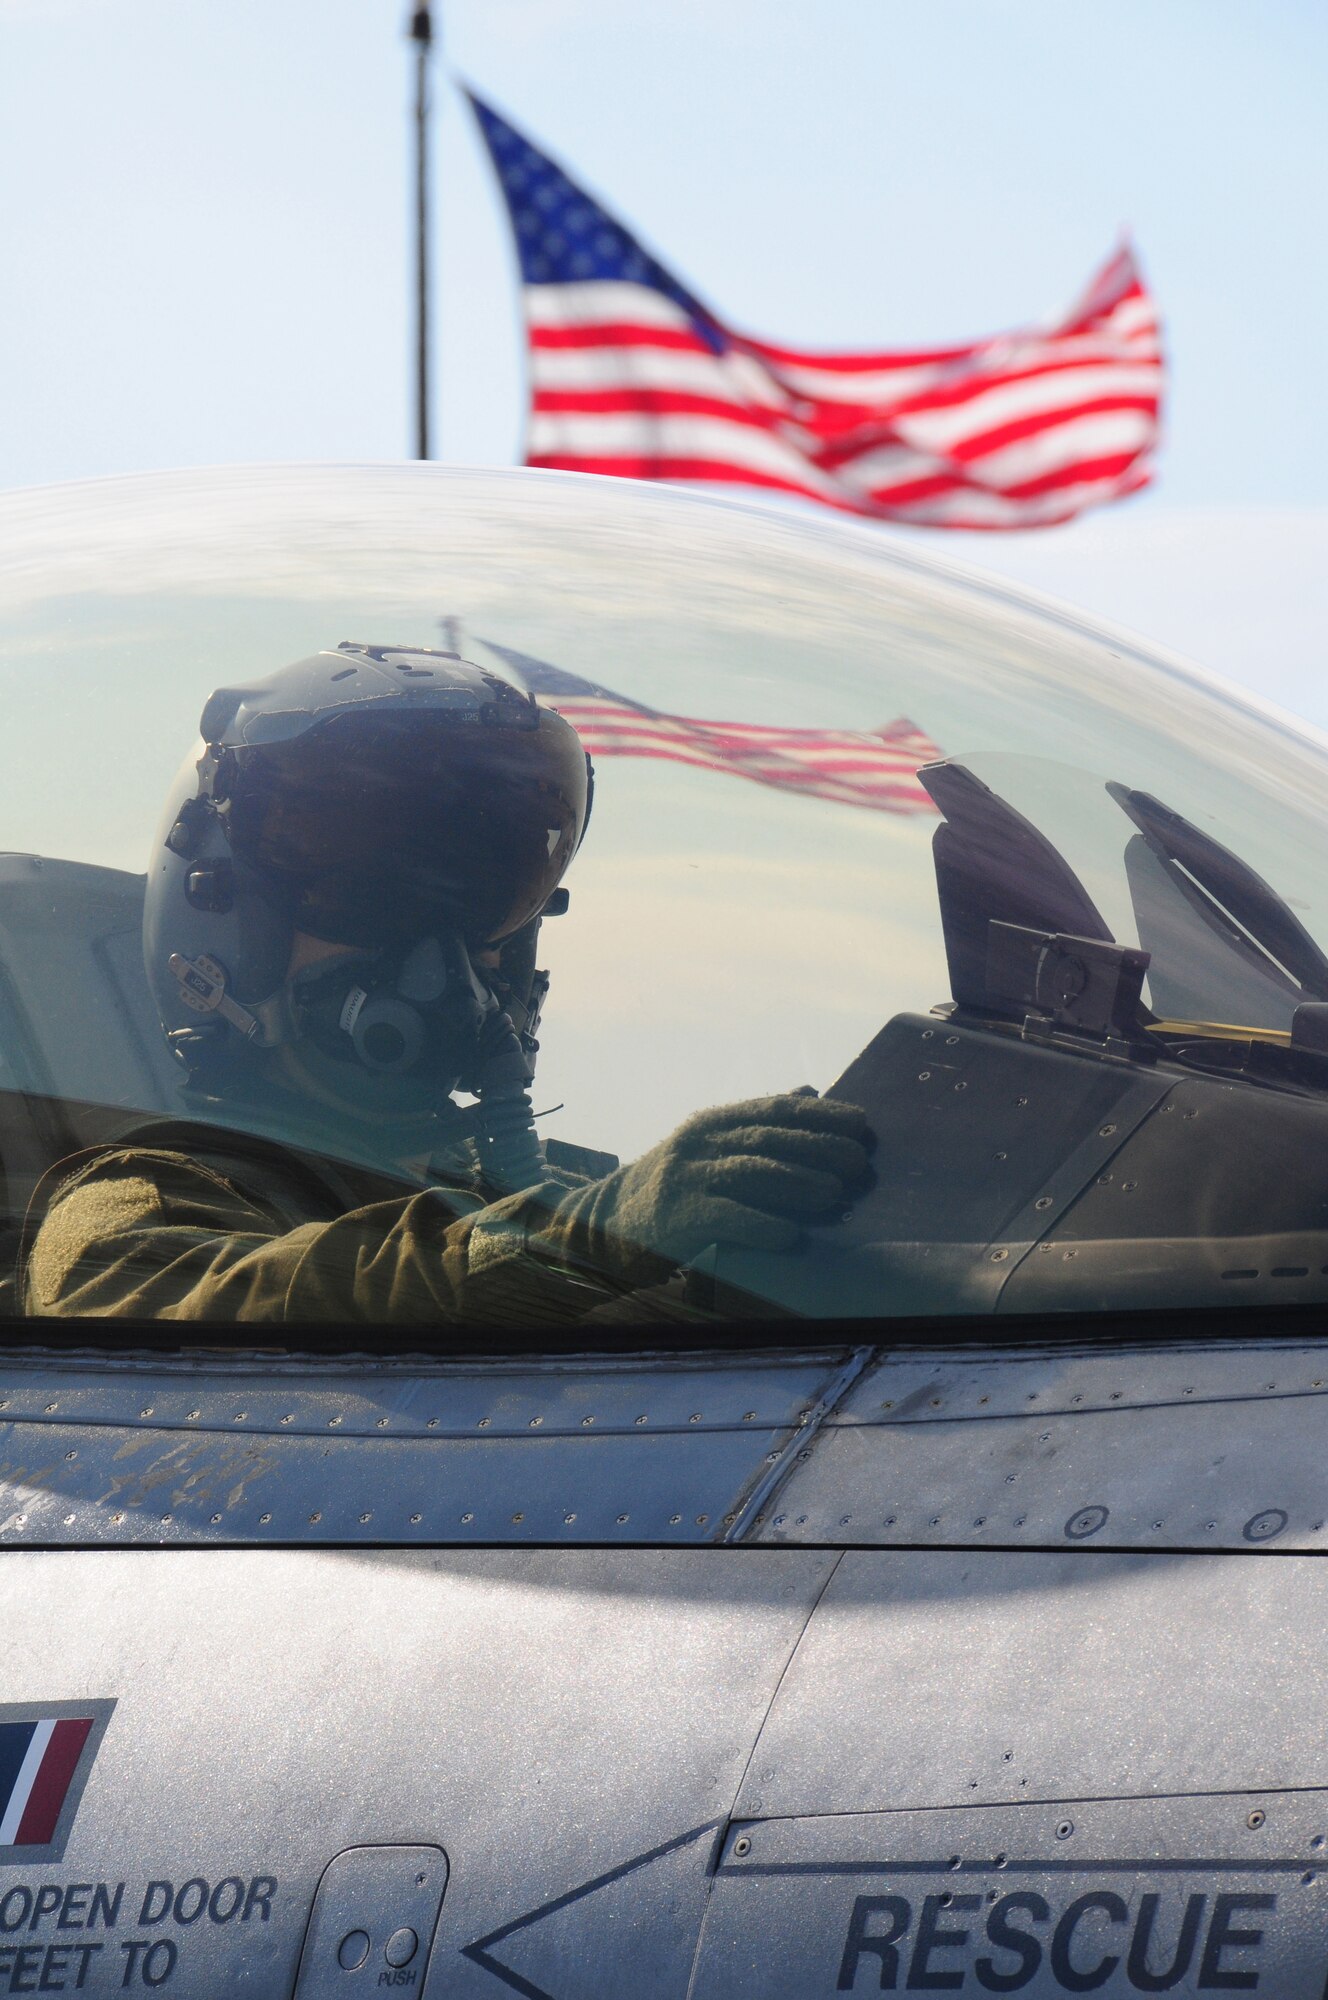 A 148th Fighter Wing F-16 pilot waits to get the go-ahead to taxi while participating in a Readiness Exercise in Duluth, Minn., July 20, 2013.  The Air Combat Command (ACC) Inspector General team evaluated the 148FW during a Readiness Inspection (RI), Aug. 22-24, 2013, the wing received an overall grade of excellent.   (U.S. Air National Guard photo by Master Sgt. Ralph J. Kapustka/Released)